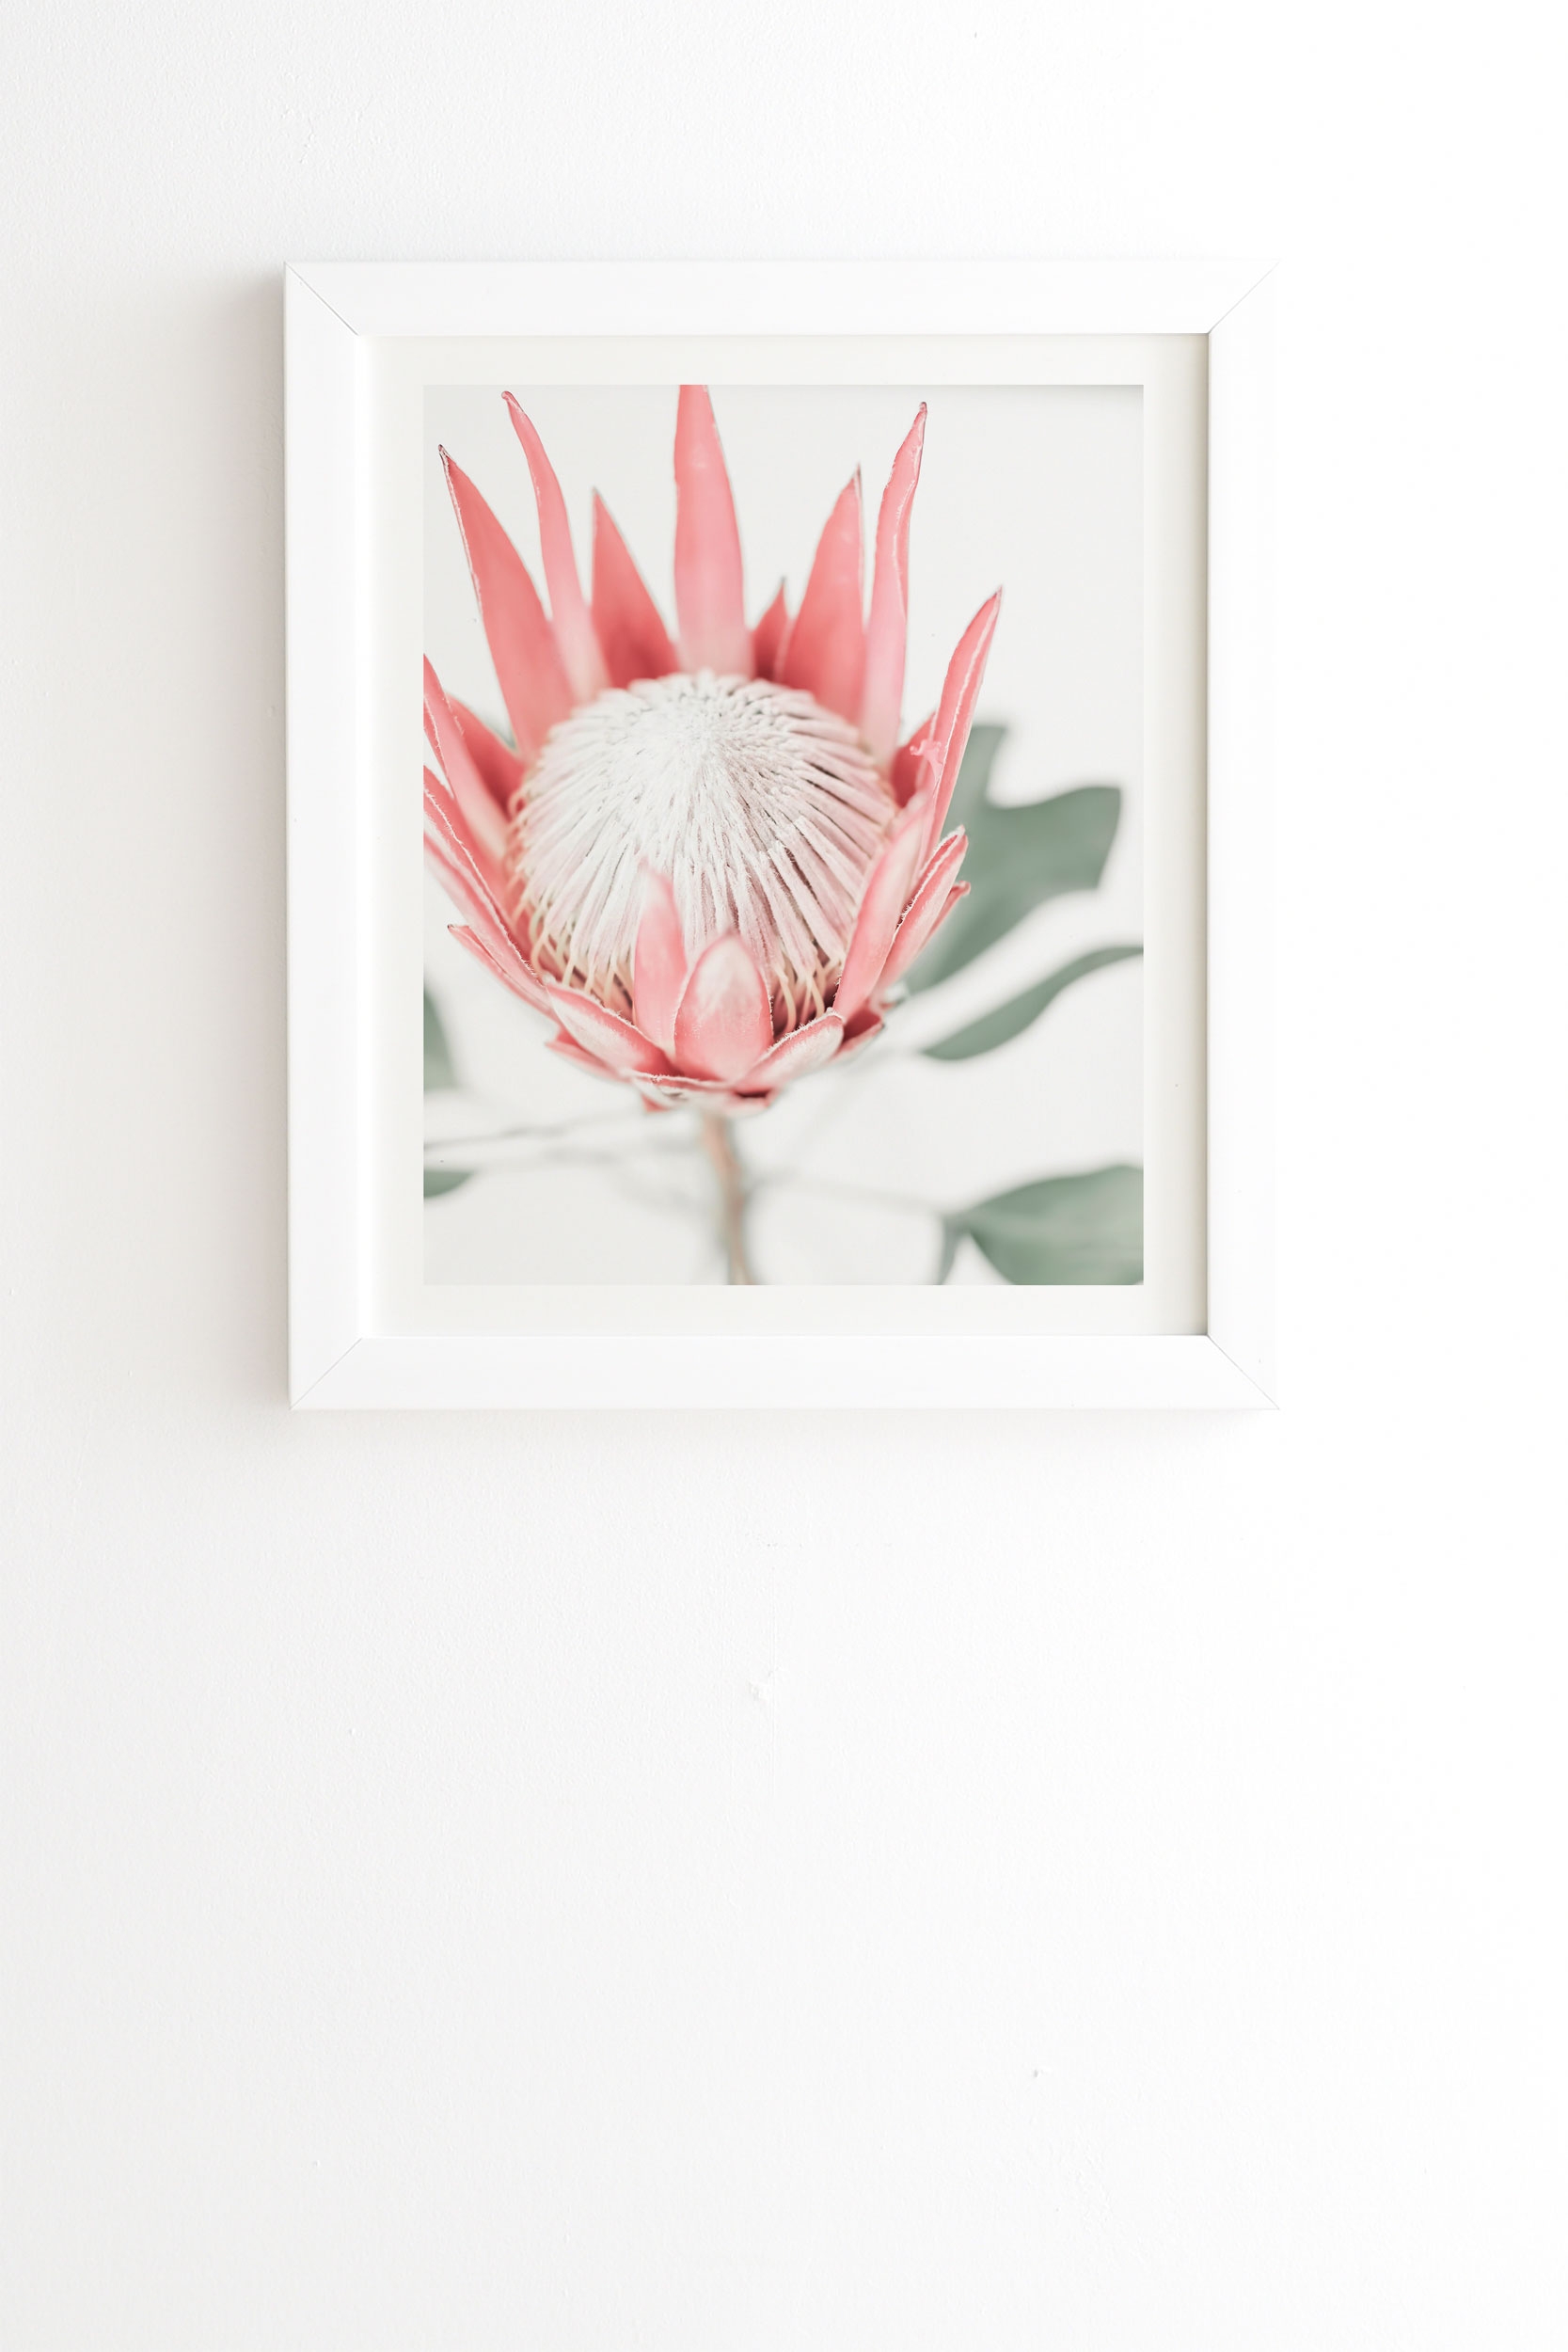 King Protea Flower Iii by Ingrid Beddoes - Framed Wall Art Basic White 8" x 9.5" - Image 0